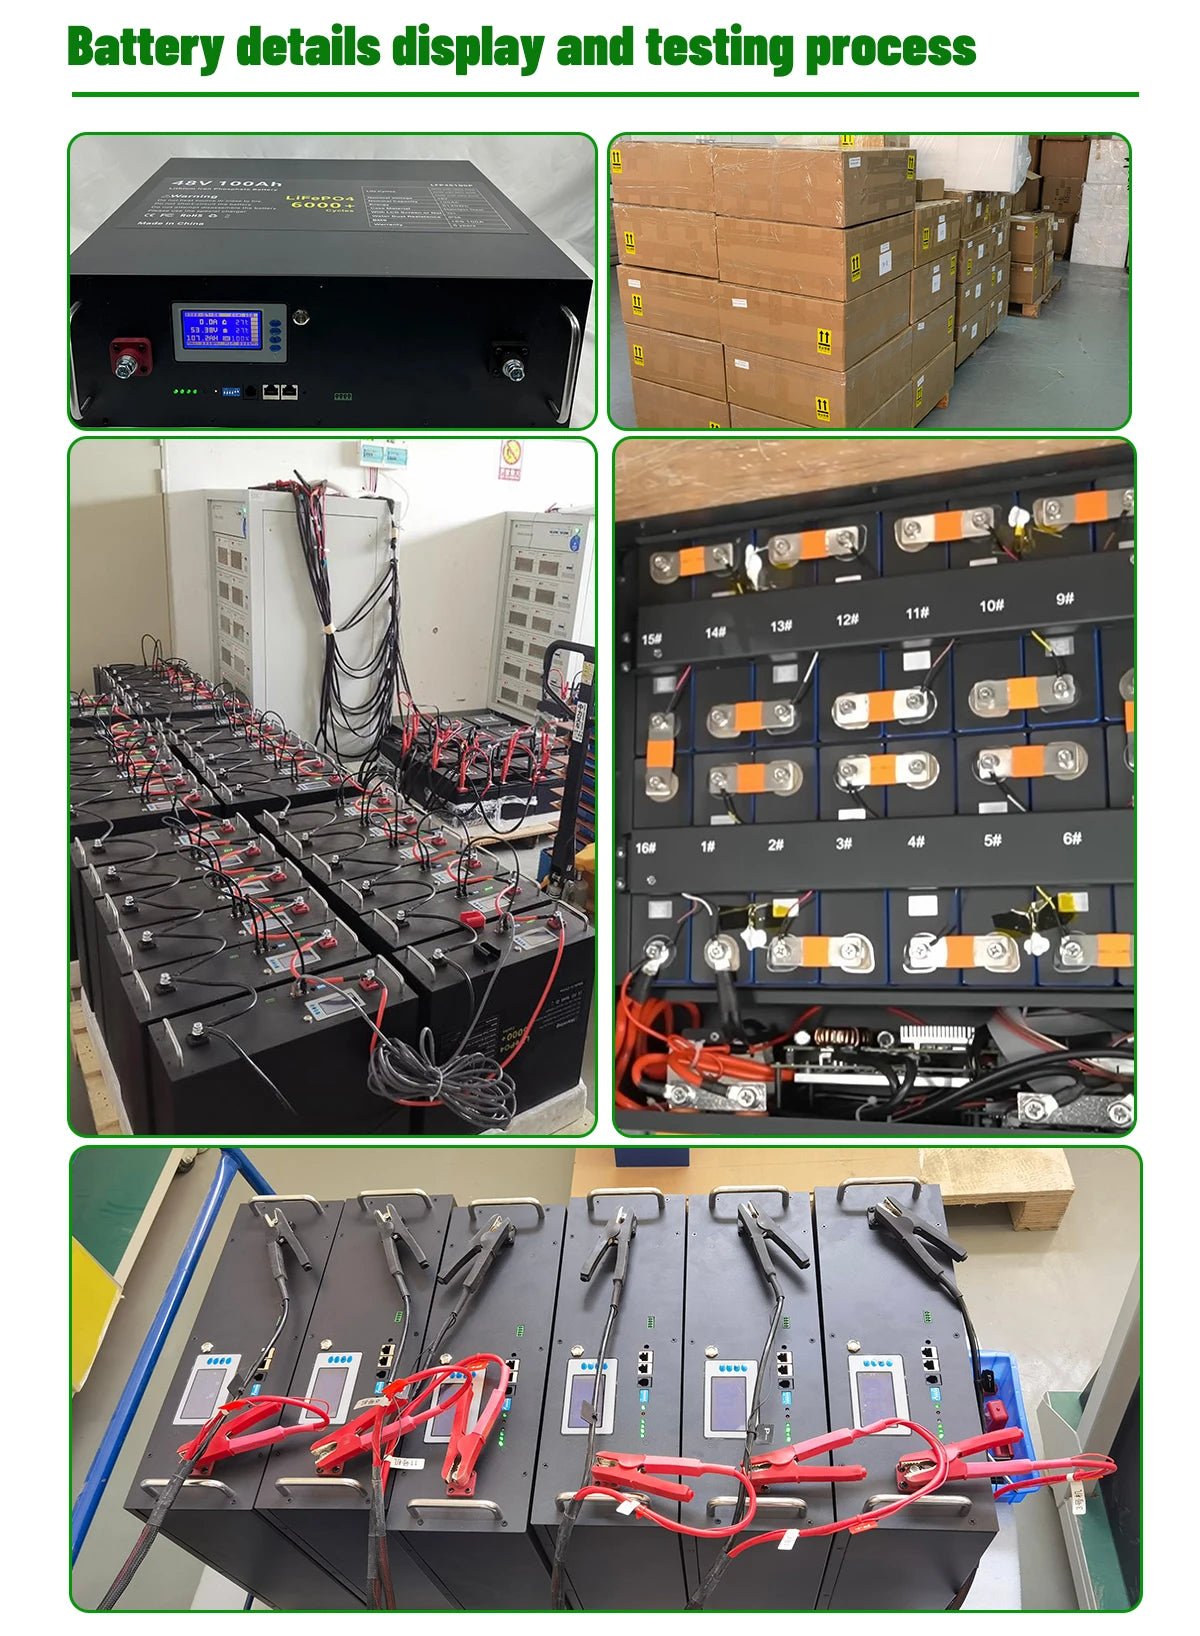 48V 200AH 10KW LiFePO4 Battery, Product information includes battery details and testing process specifications.